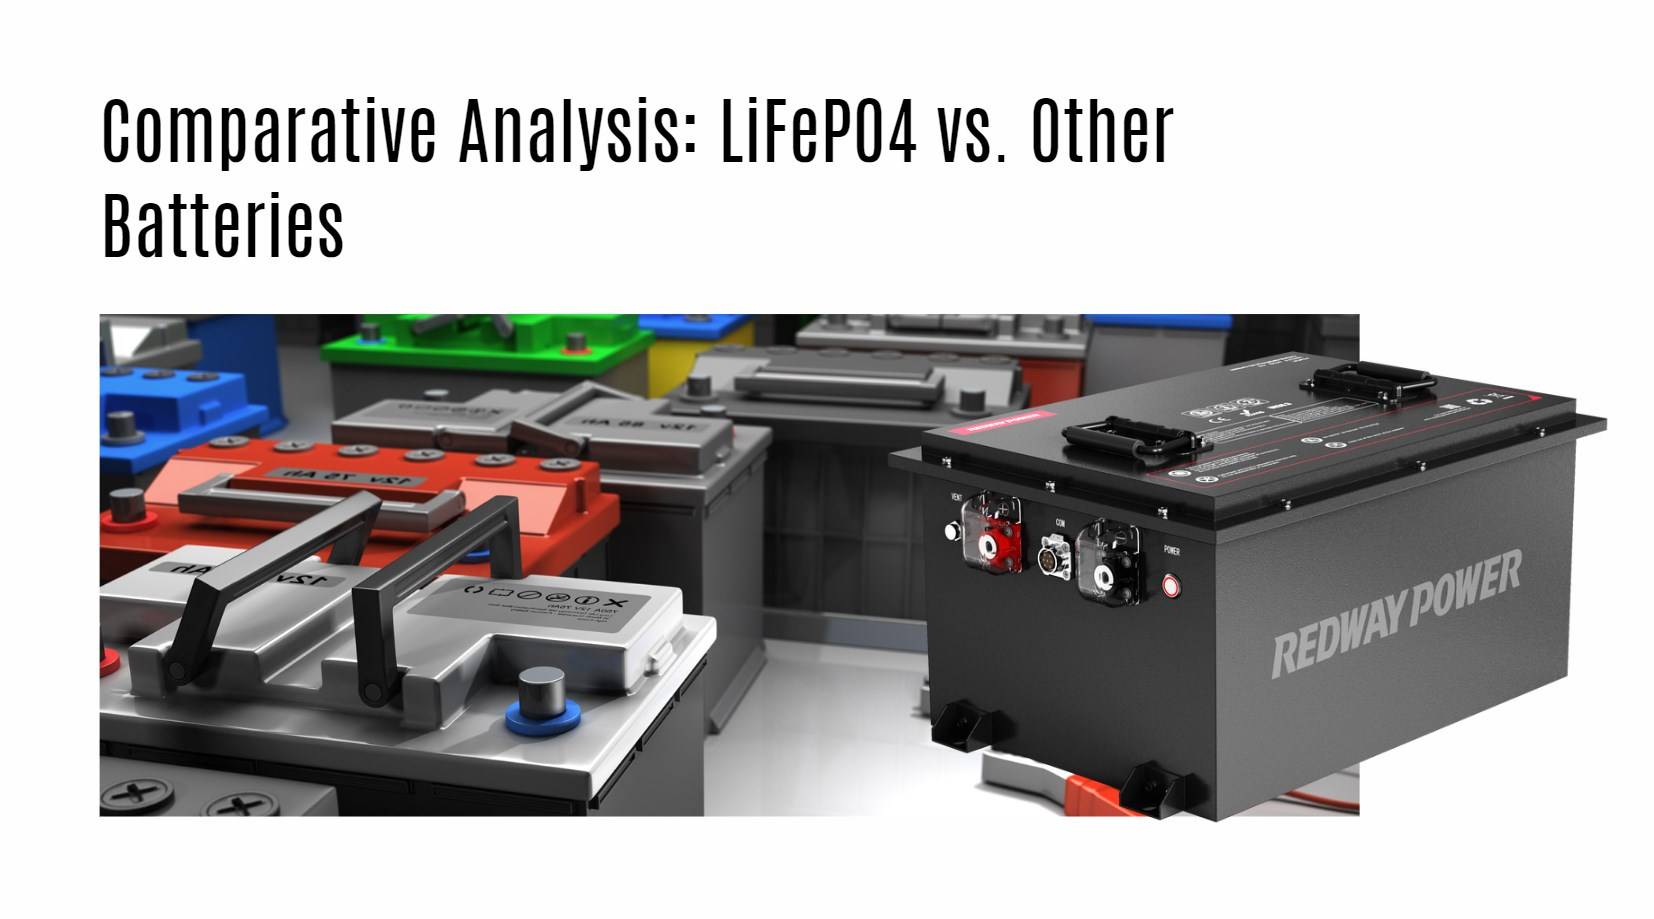 Comparative Analysis: LiFePO4 vs. Other Batteries